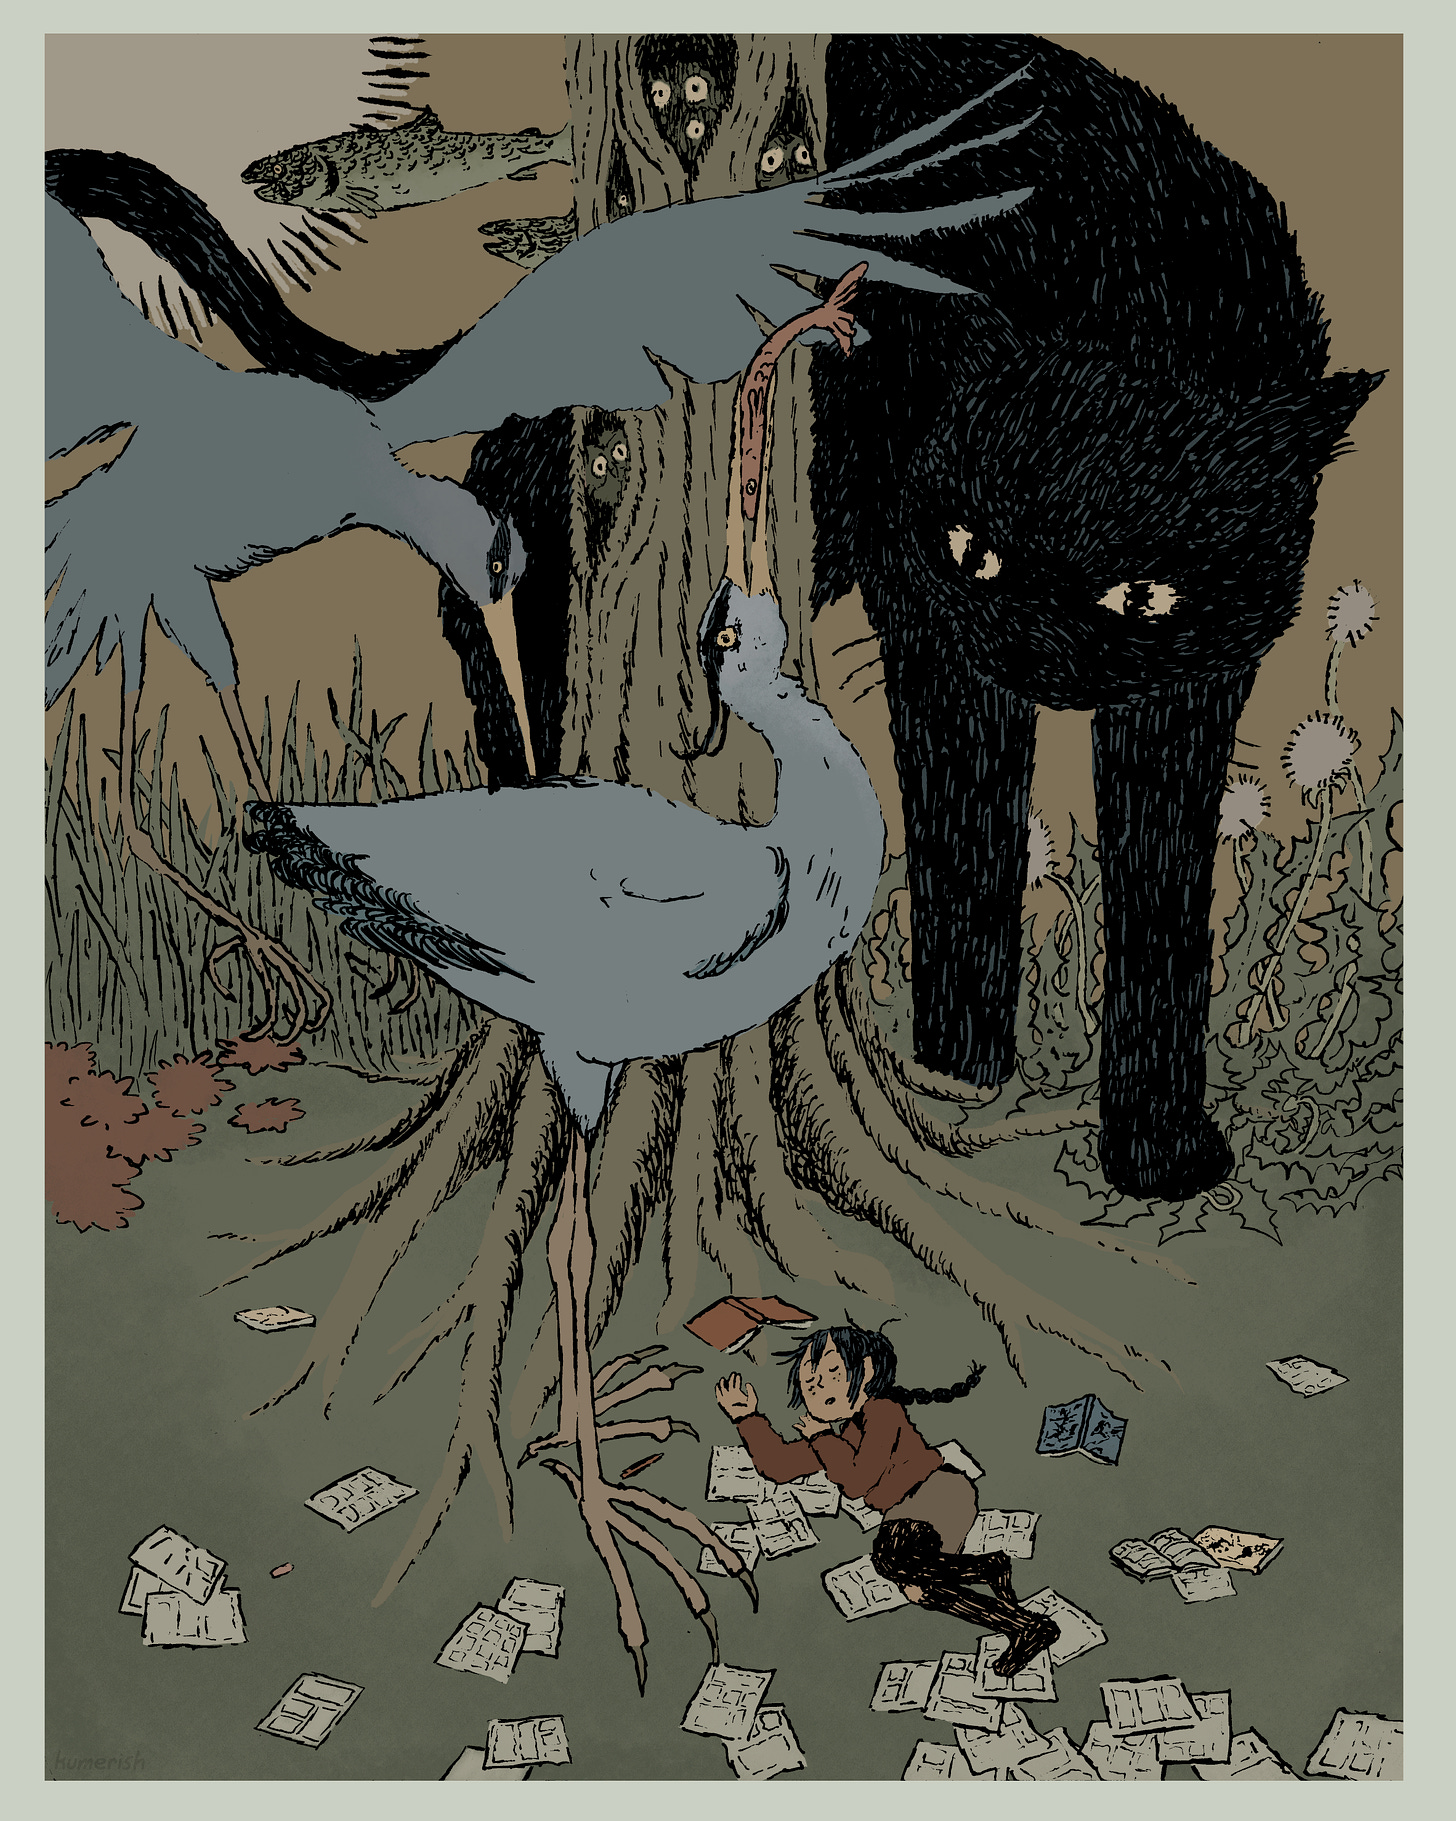 Kaye, a young girl, sleeps amongst herons, a strange tree, a cat, and fish that fly through the sky.